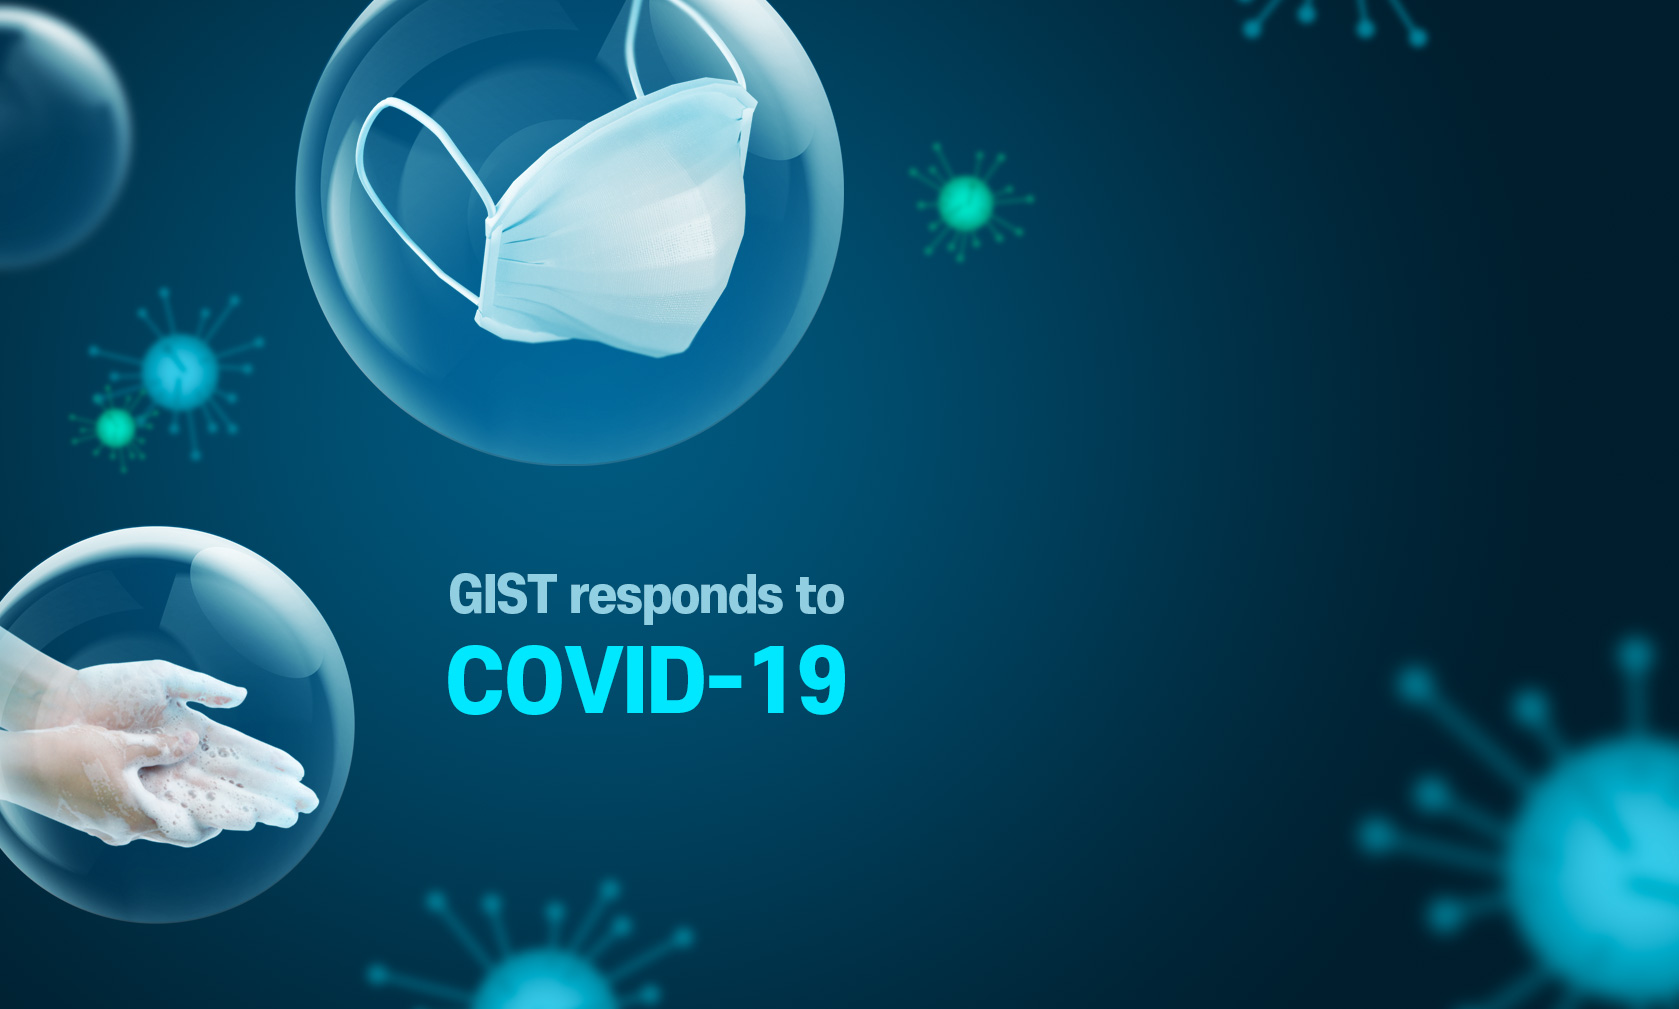 GIST responds to COVID-19